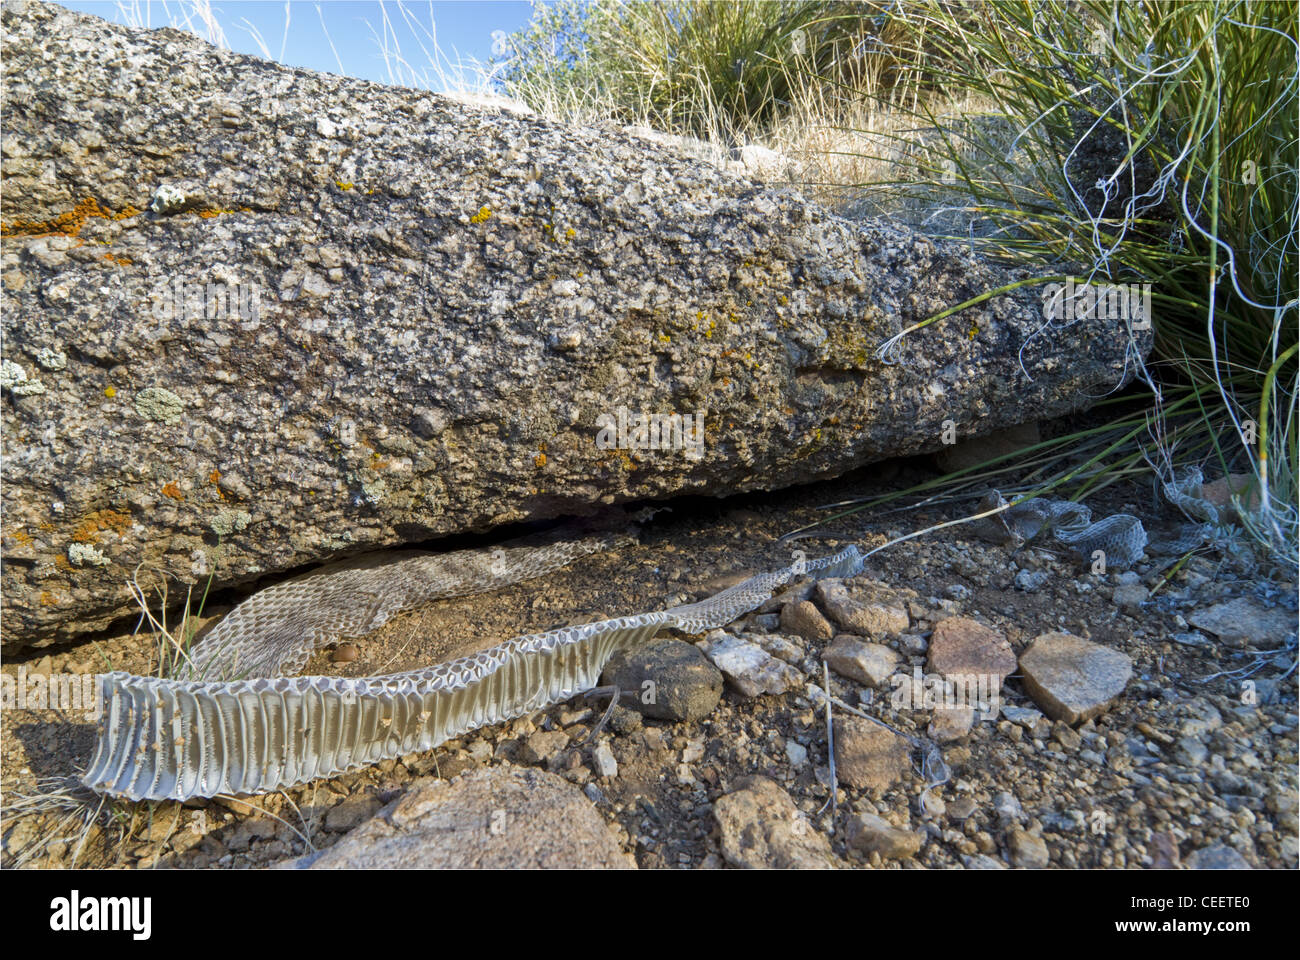 Shed skin of a Northern Black-tailed Rattlesnake, (Crotalus molossus molossus), beneath a granite boulder, New Mexico, USA. Stock Photo